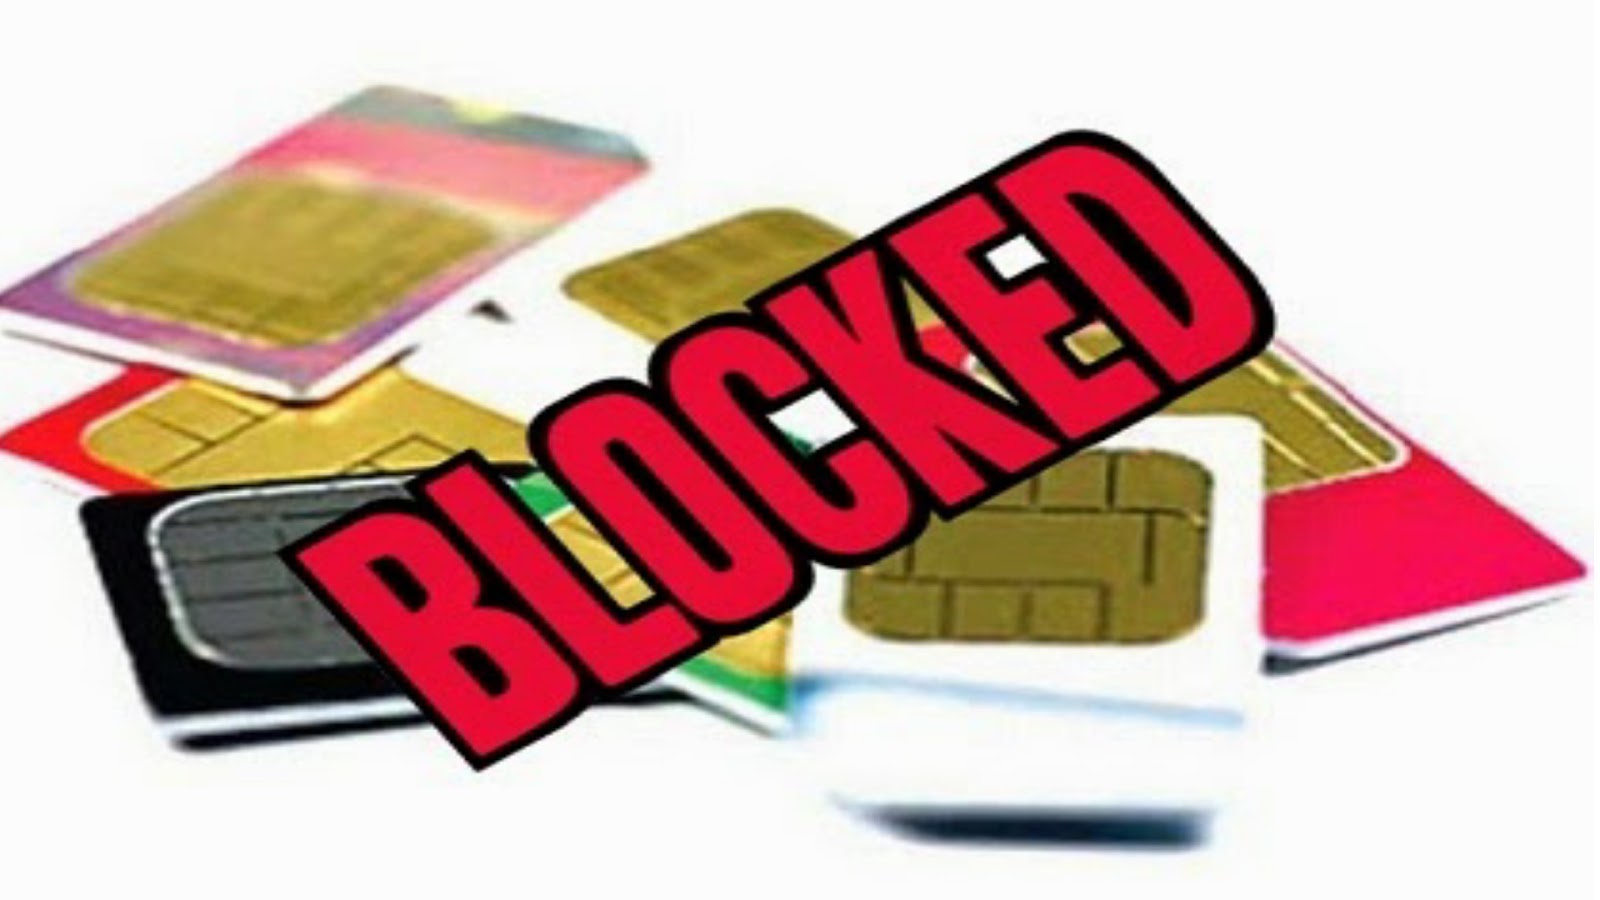 Telecom Operators in Islamabad Block Over 3,500 SIM Cards in Crackdown on Tax Evasion